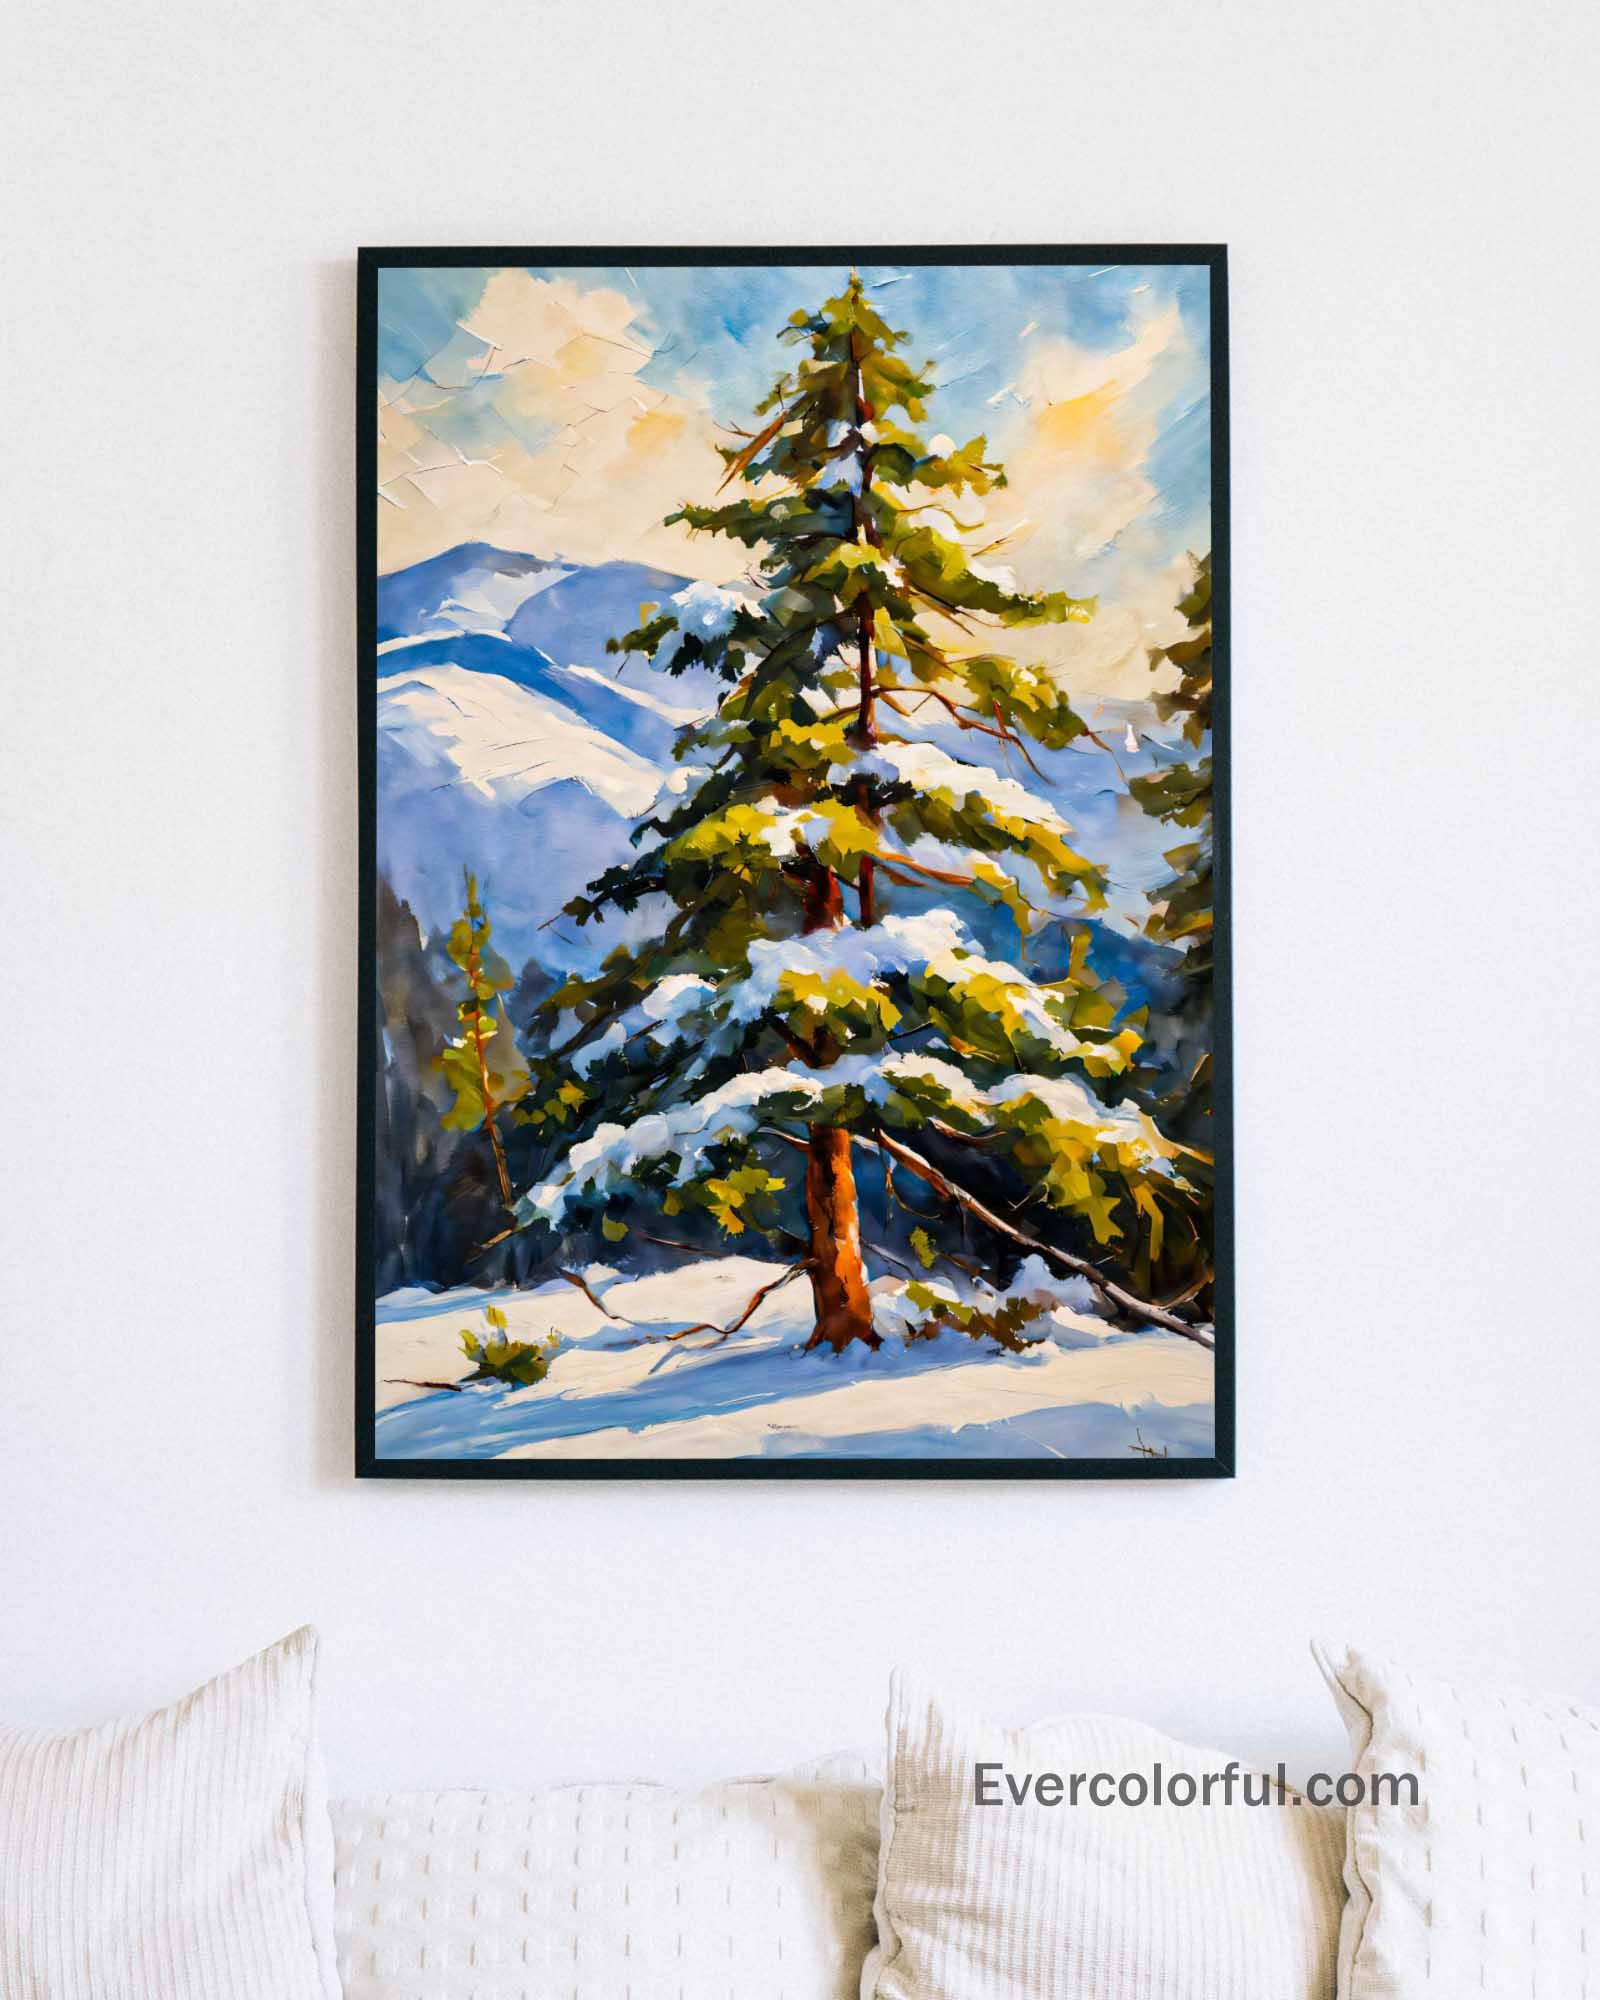 Frosted fir - Poster - Ever colorful